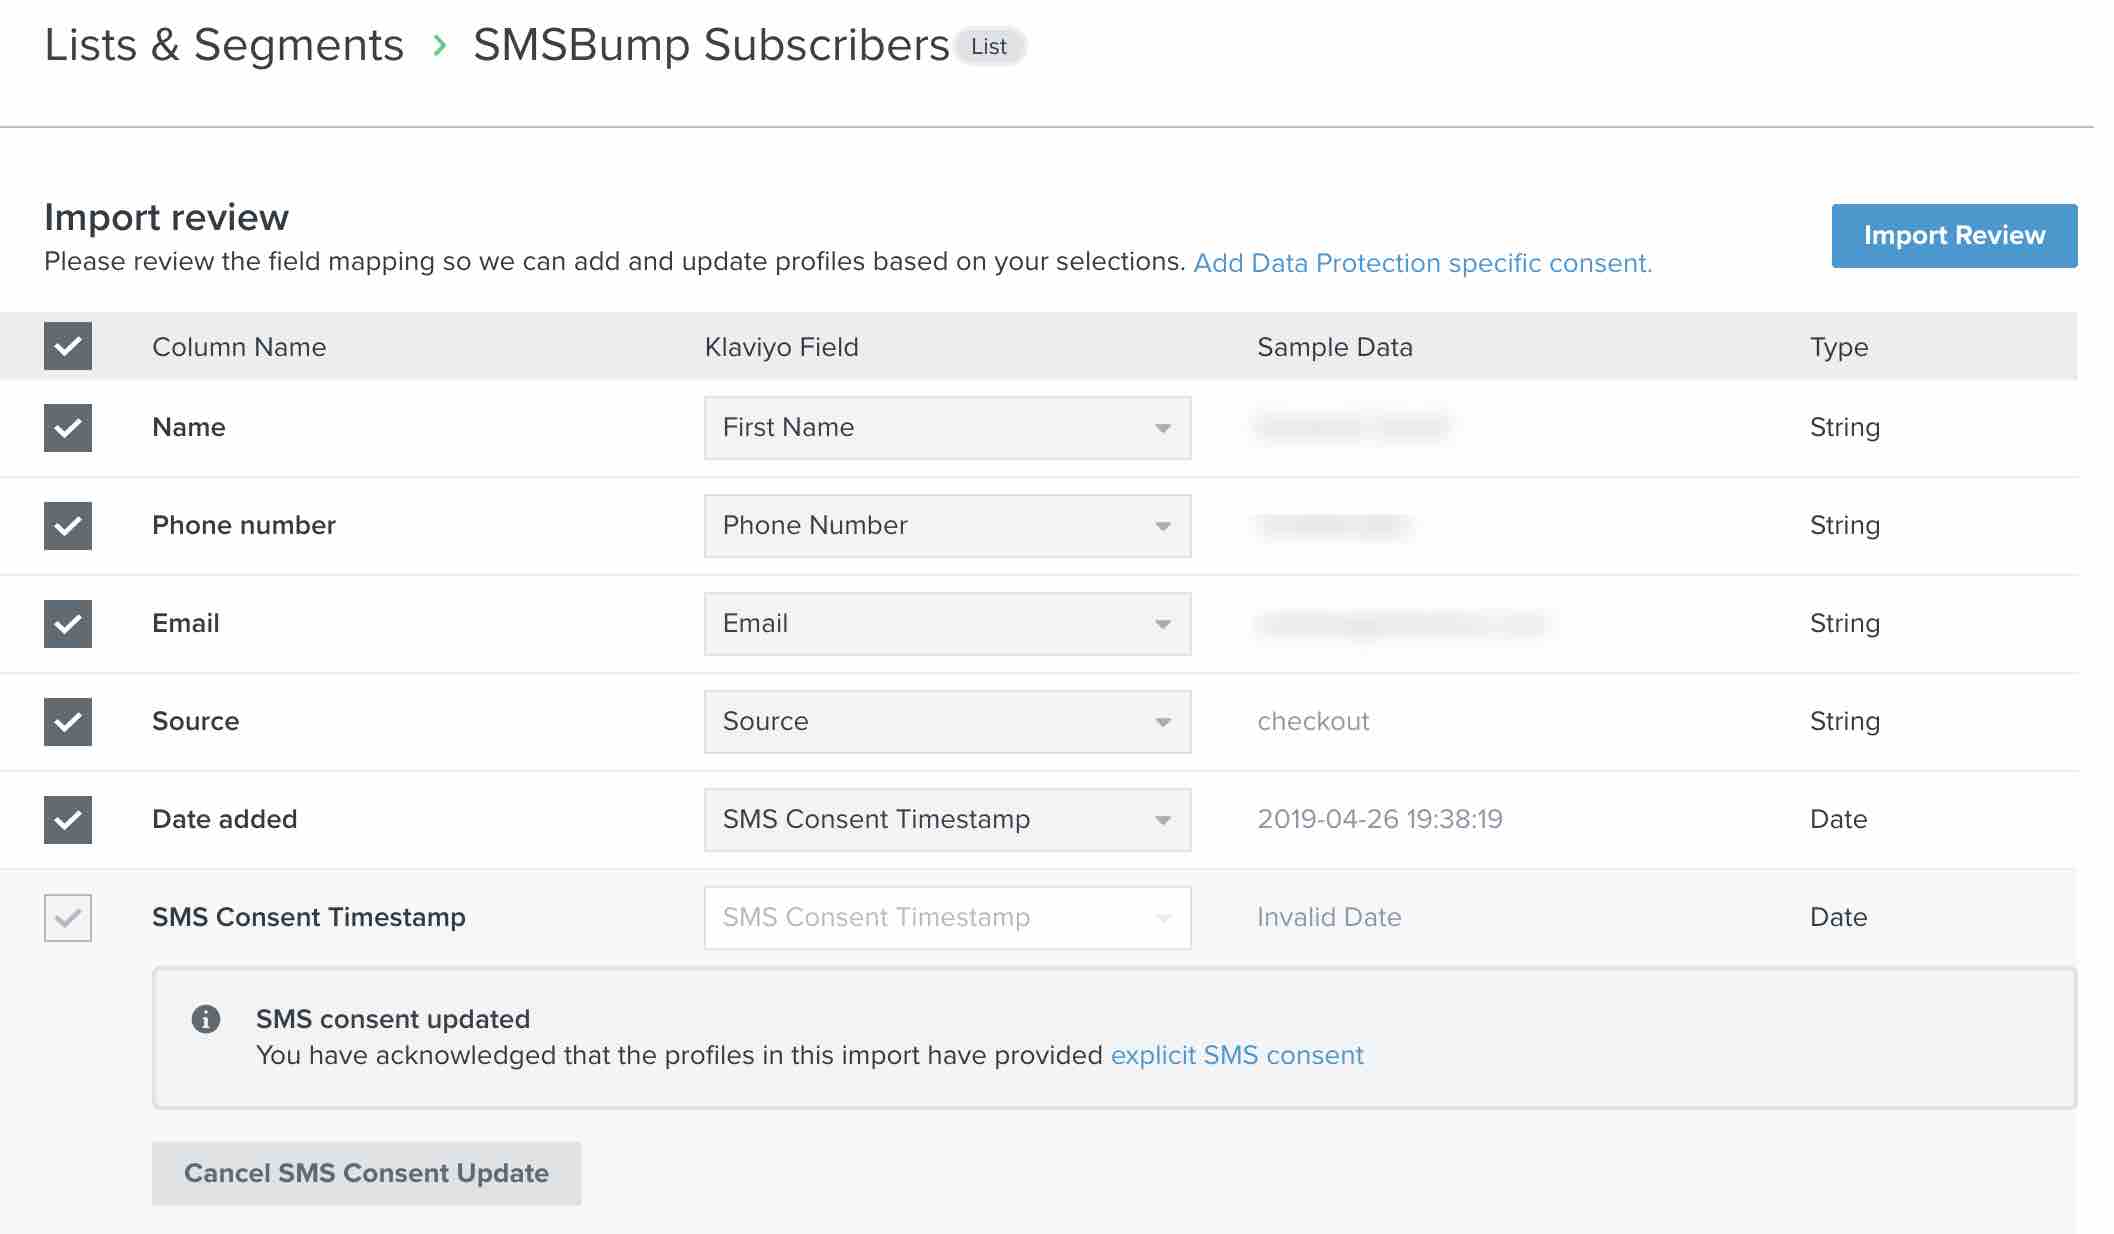 Import review of fields including SMS Consent Timestamp